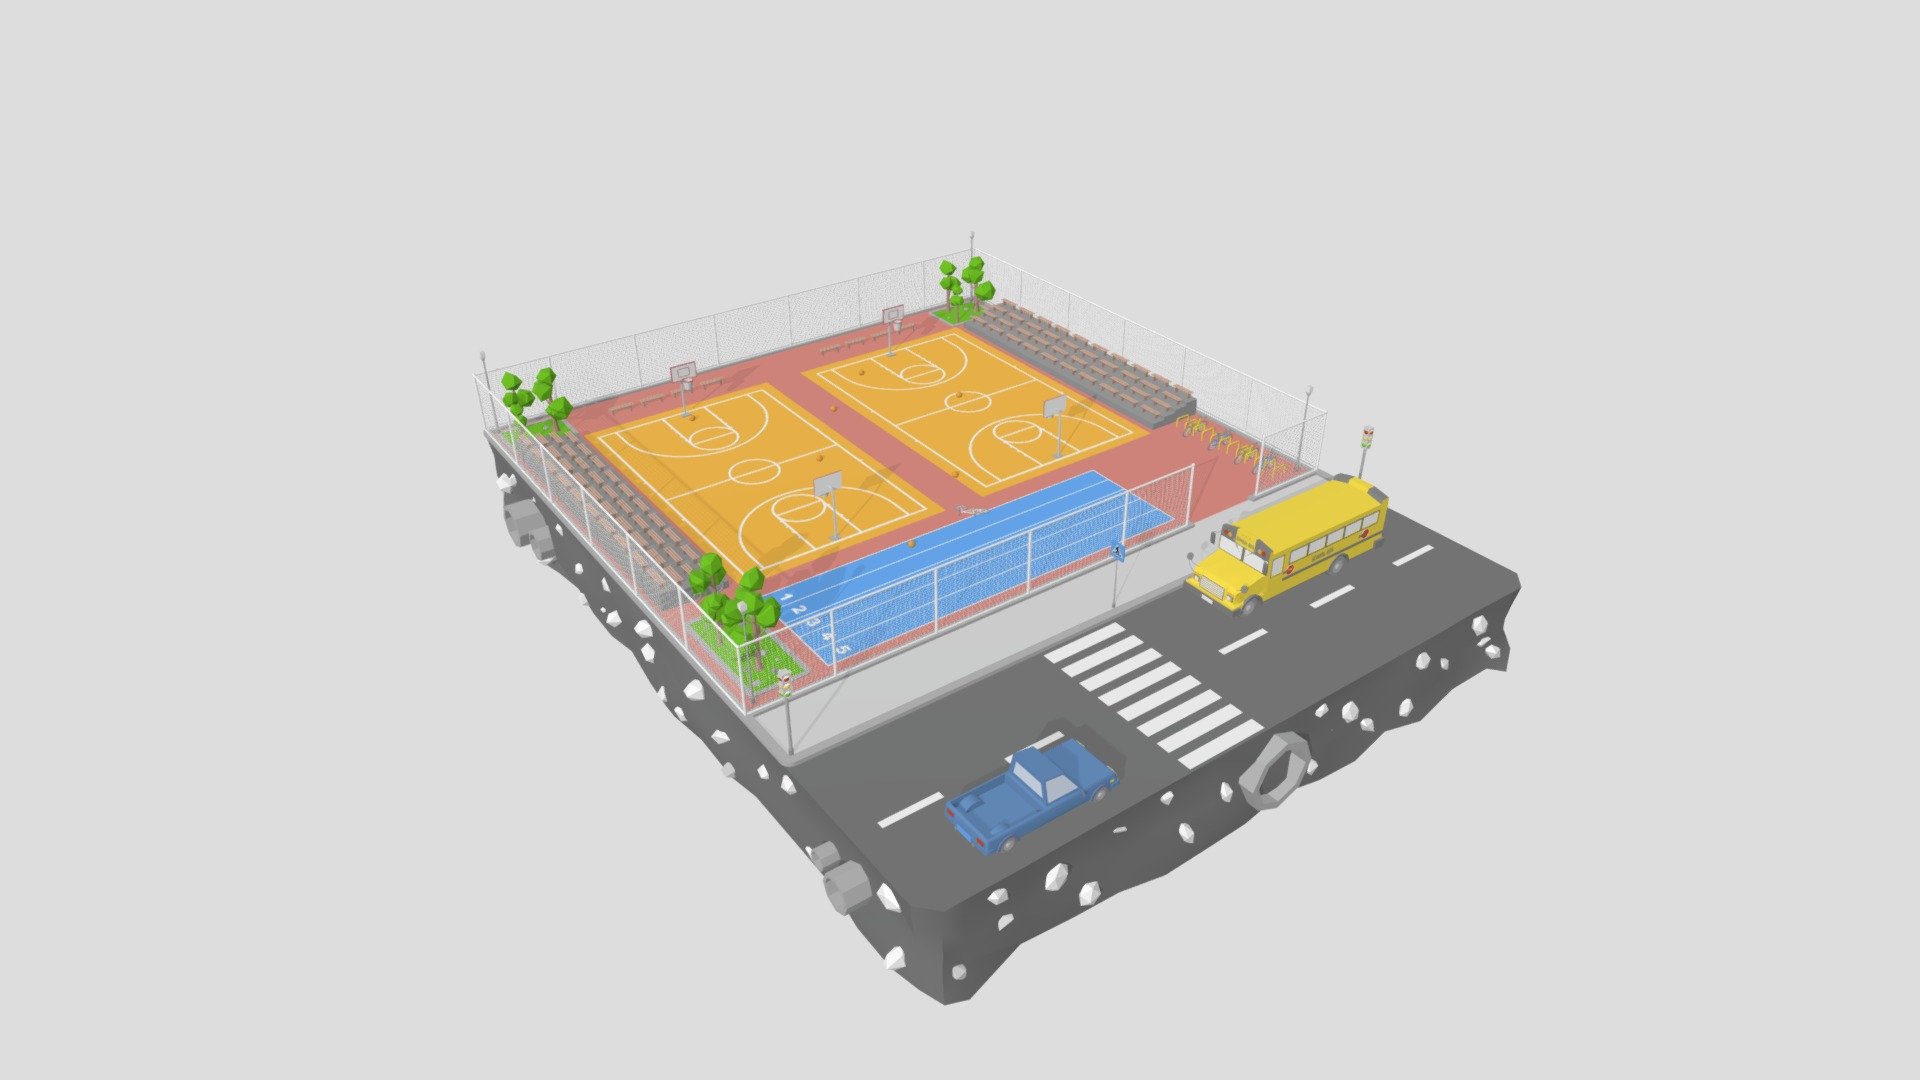 This is a great Basketball Court Low Poly 3D model for you projects. 

This scene includes the following:

Low Poly Basketball Court
Low Poly Car Truck and School Bus
Low Poly Bicycles
Low Poly Trees
Traffic Lights, Road Signs

Created in Cinema4D R25. No third party plugins needed. Standard Render with standard materials. 

Formats included: .c4d .obj .fbx .3ds 

Poly Count: 357038, Points Count: 426553, Object Count: 4206

I hope you will like it. Also, make sure to check my other models. Don’t forget to leave the feedback and rate the models. Thank you

basketball, court, stadium, sport, game, basket, floor, 3d, arena, ball, three-dimensional, field, design, net, play, championship, competition, team, training, low, poly, school, bus, truck, car, city, isometric, equipment, illustration, recreation - Basketball Court Low Poly - 3D model by ruslanmikaielian 3d model